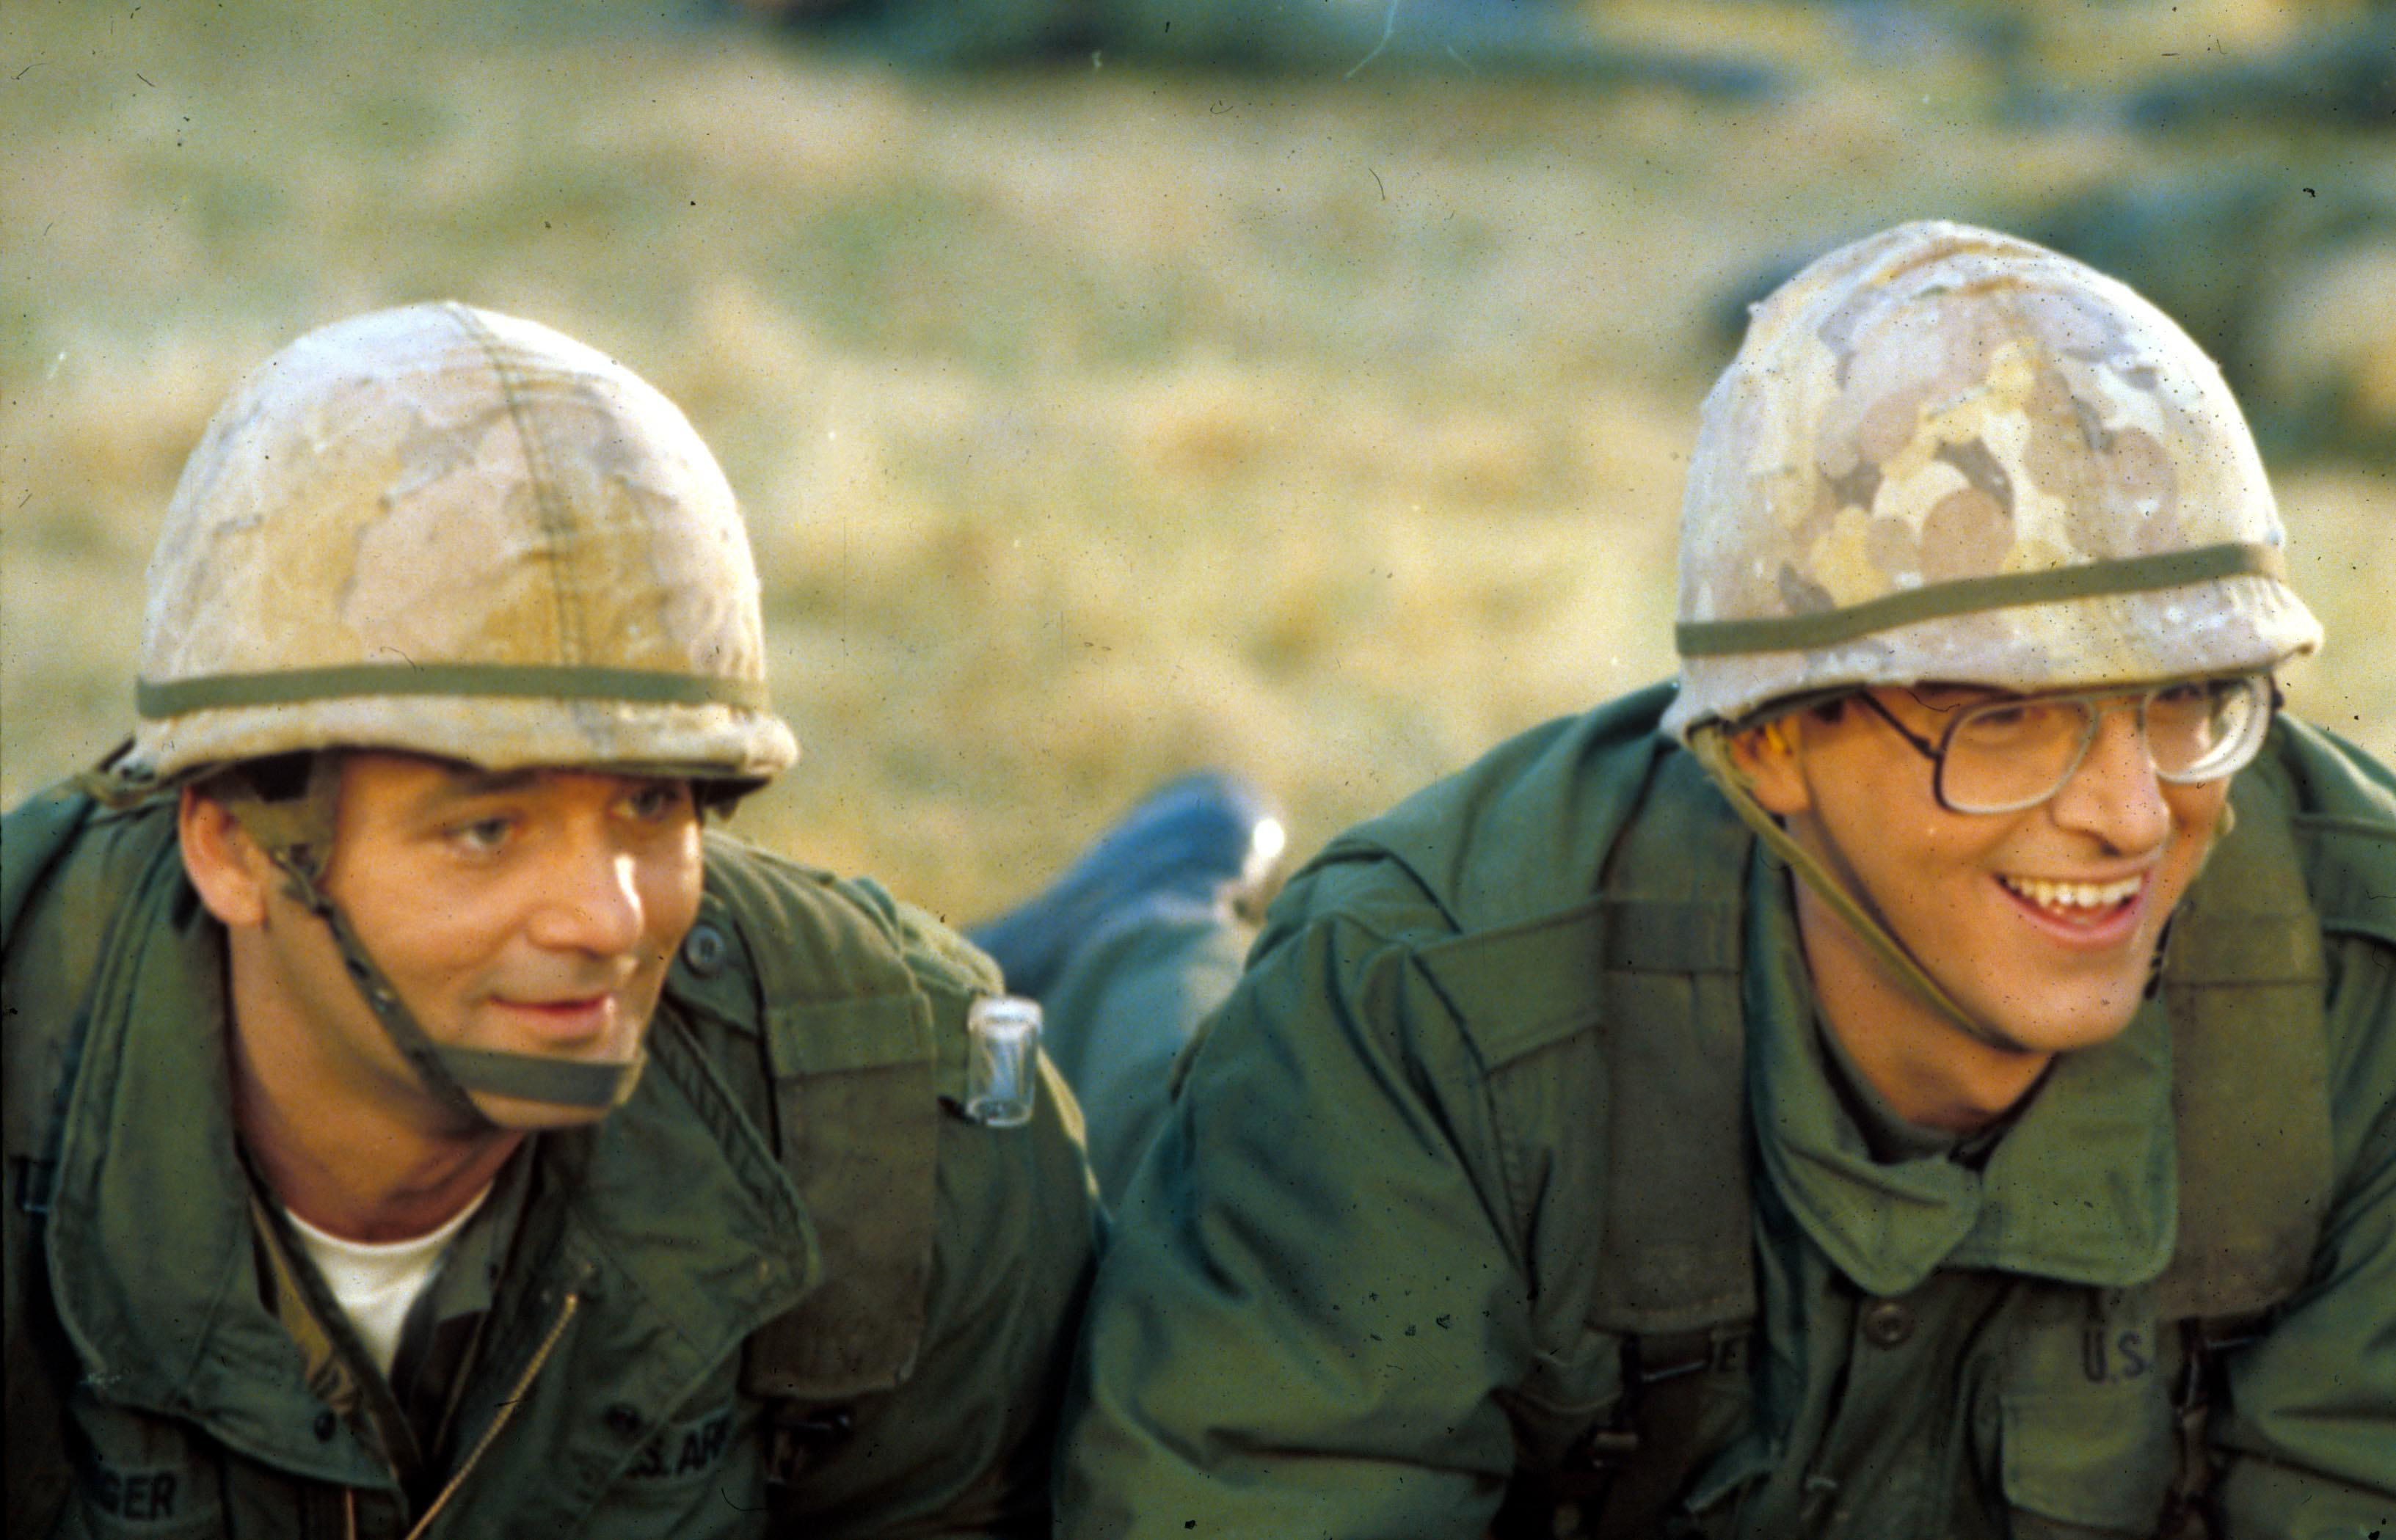 Bill Murray and Harold Ramis lay down in army gear